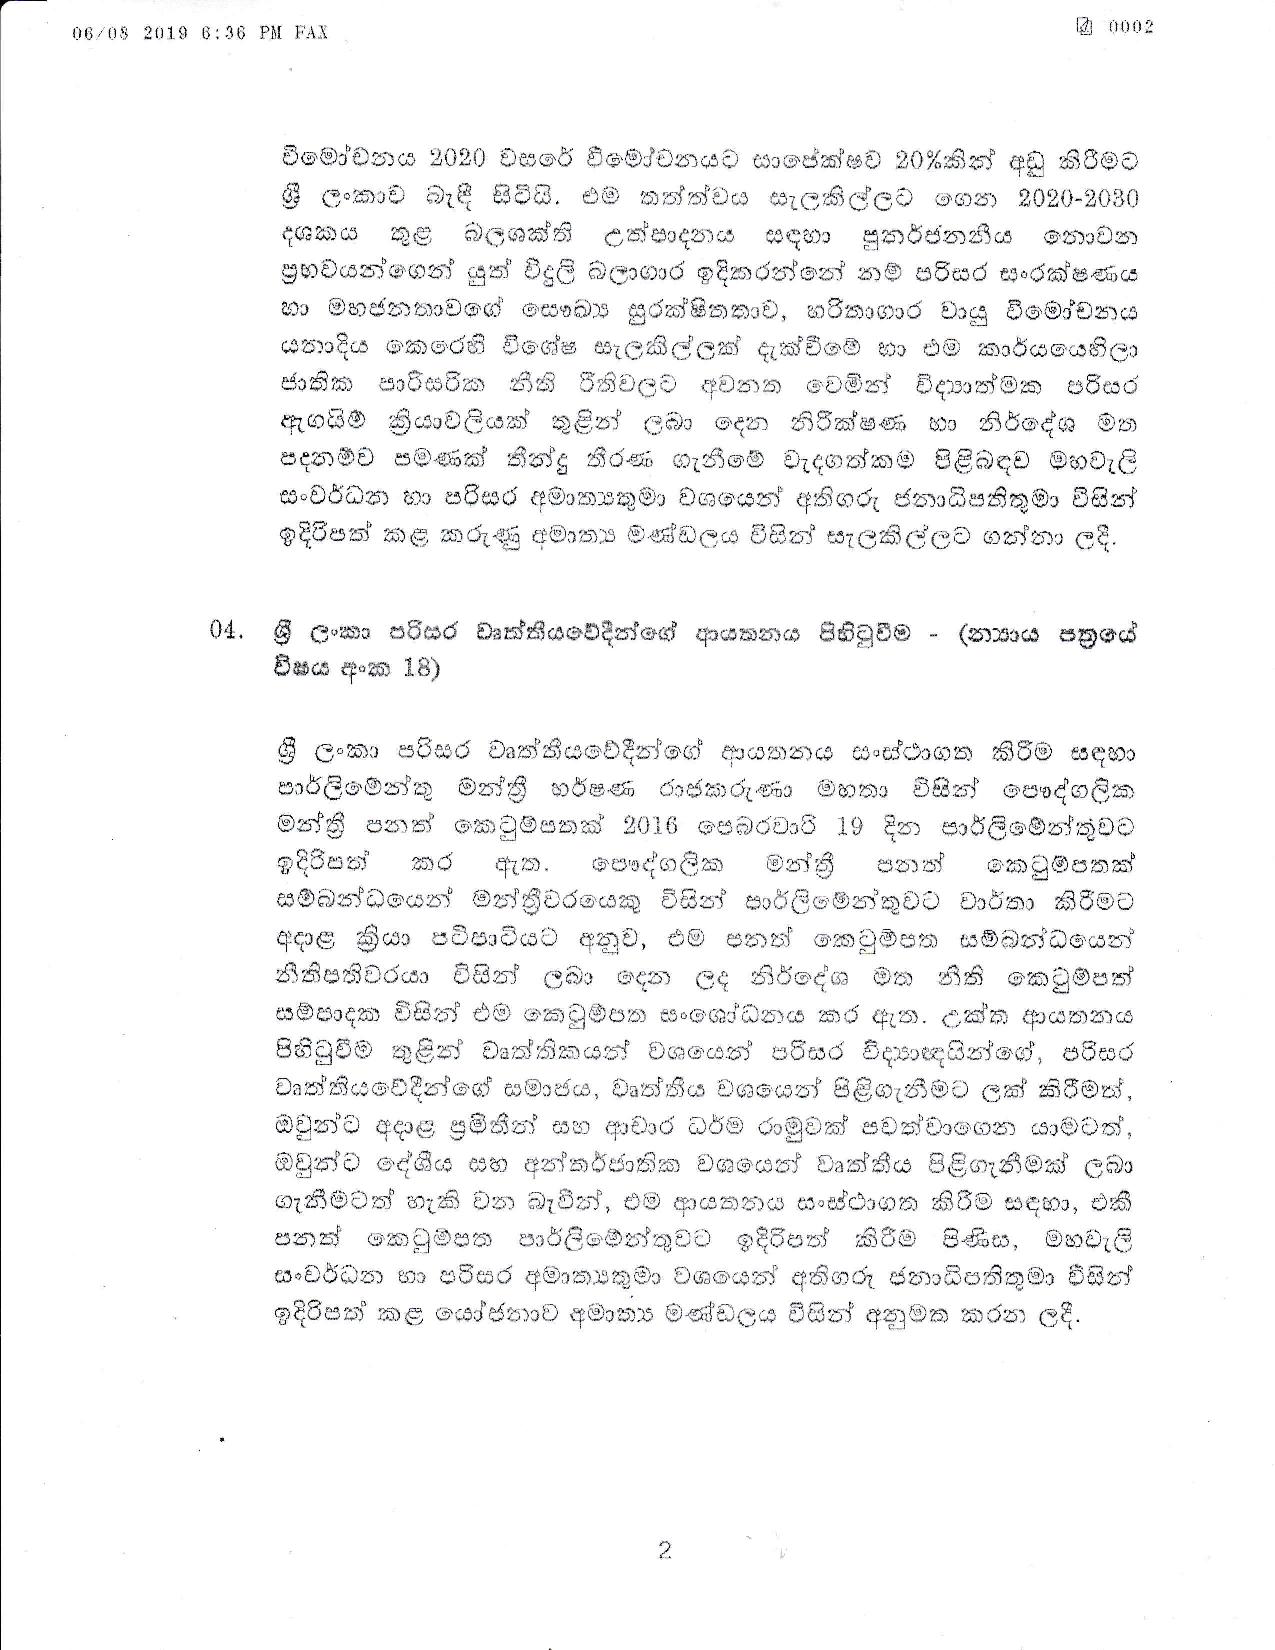 Cabinet Decision on 06.08.2019 Full Document page 002